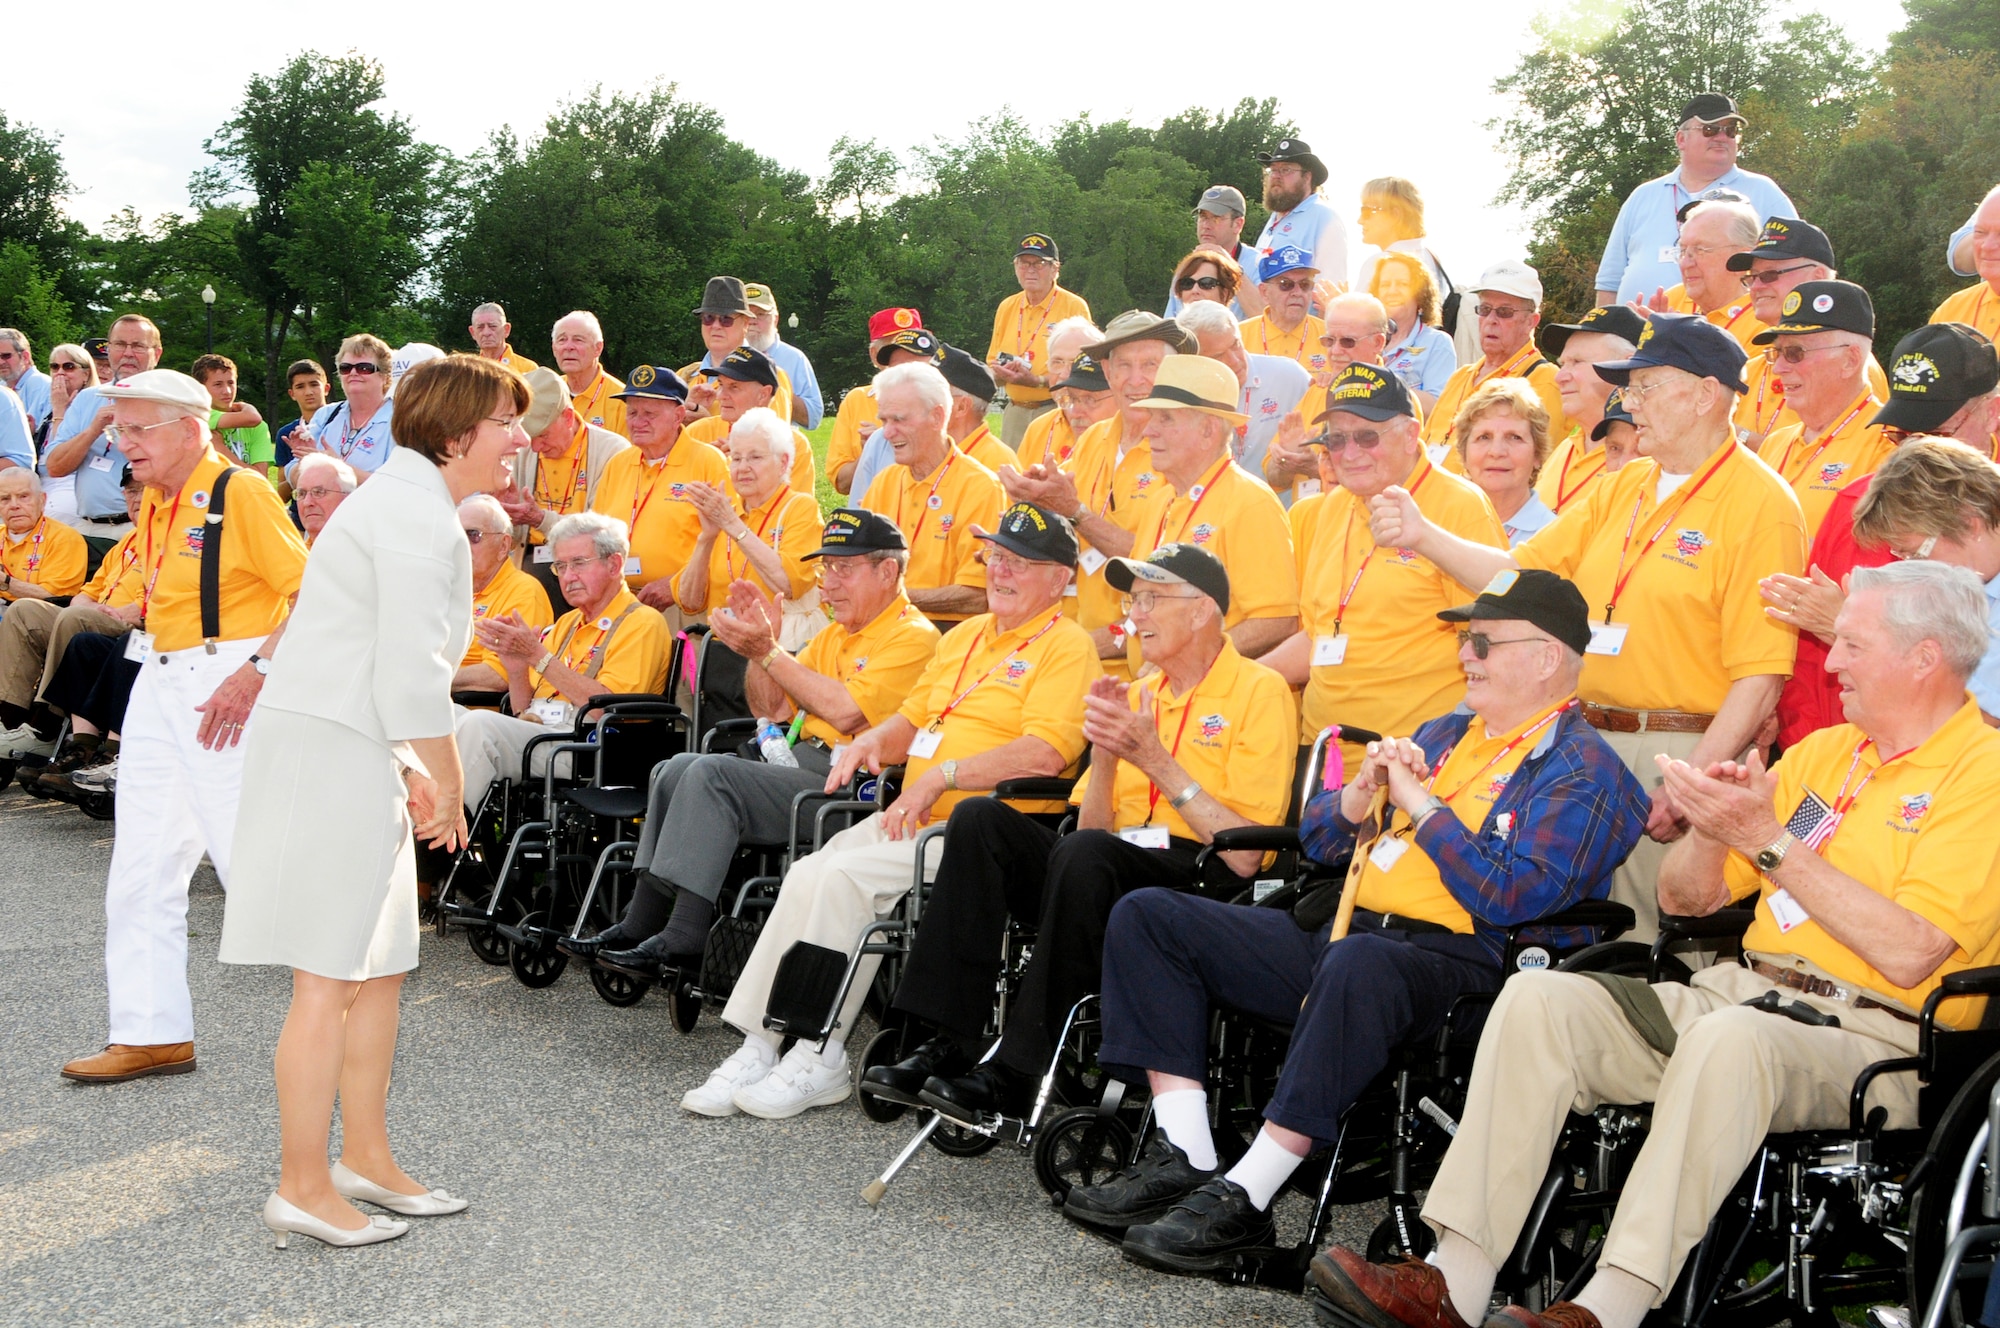 U.S Senator Amy Klobuchar greets 85 World War II veterans at the Lincoln Memorial, Washington D.C. Tuesday May 15, 2012 during their day tour.  Senators Klobuchar and Franken expressed their gratitude to the veterans for their service and sacrifices.  (National Guard photo by Tech. Sgt. Scott G. Herrington.)